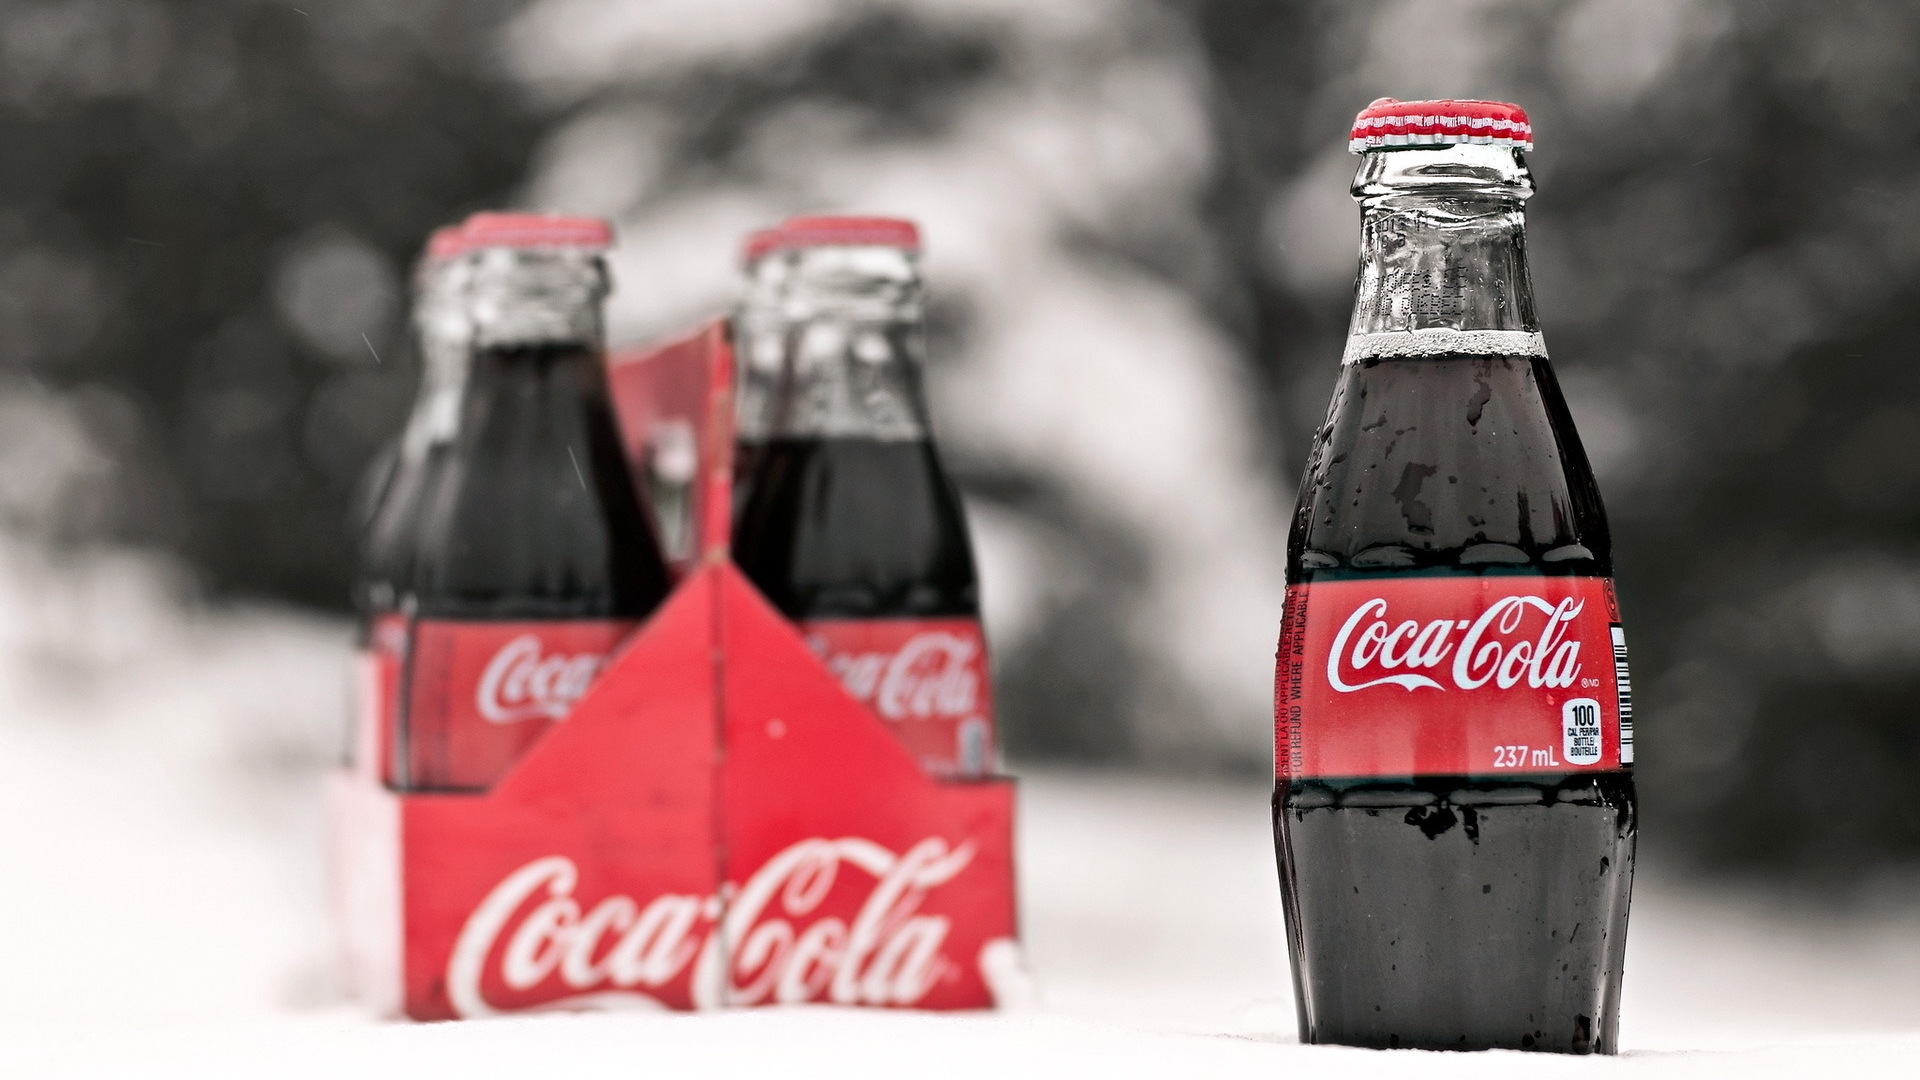 CocaCola Bottles for 1920 x 1080 HDTV 1080p resolution